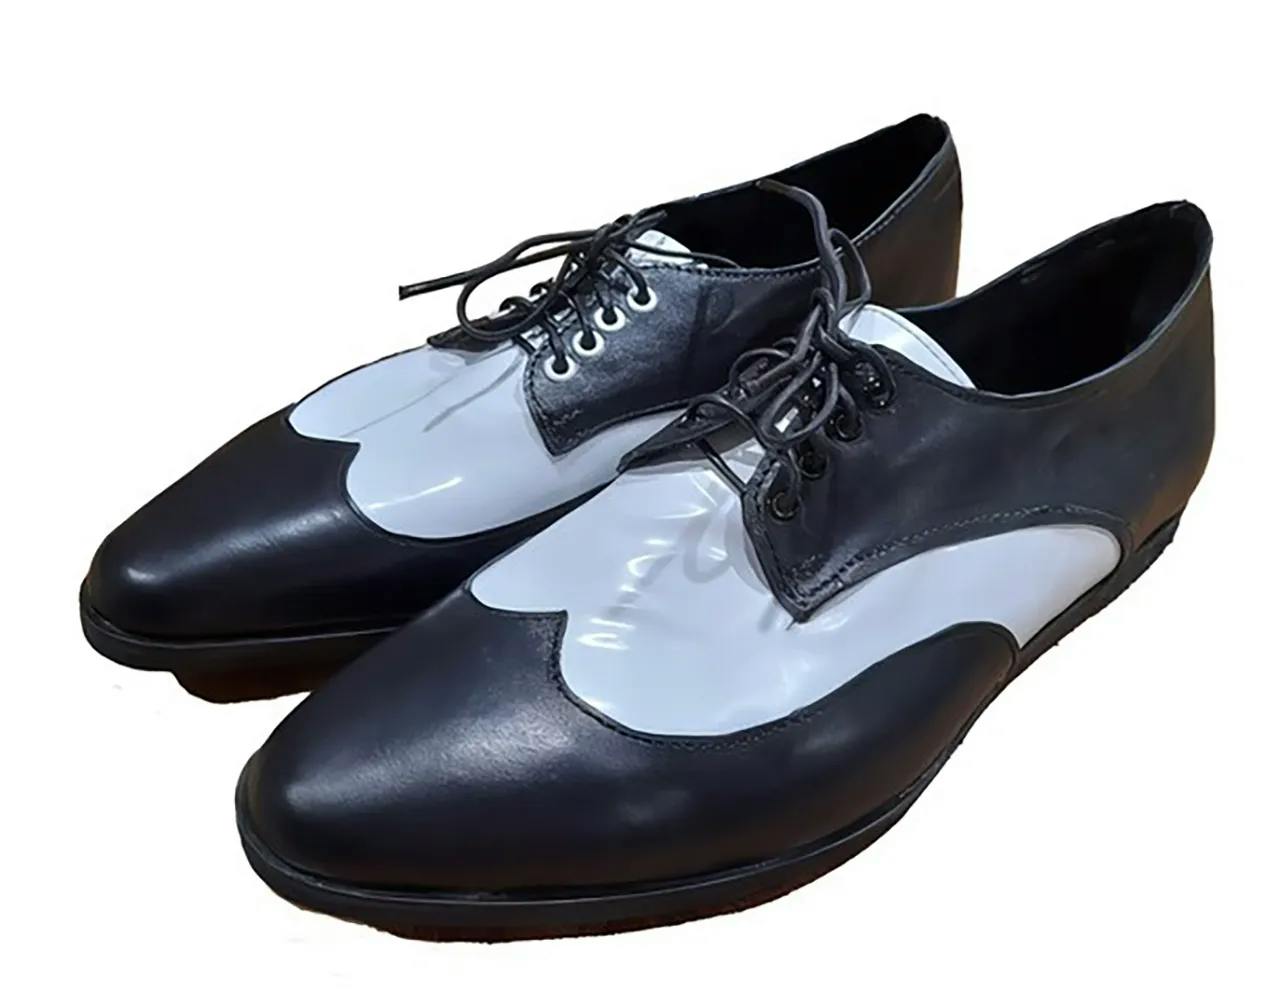 Make a Pair of Derby Shoes